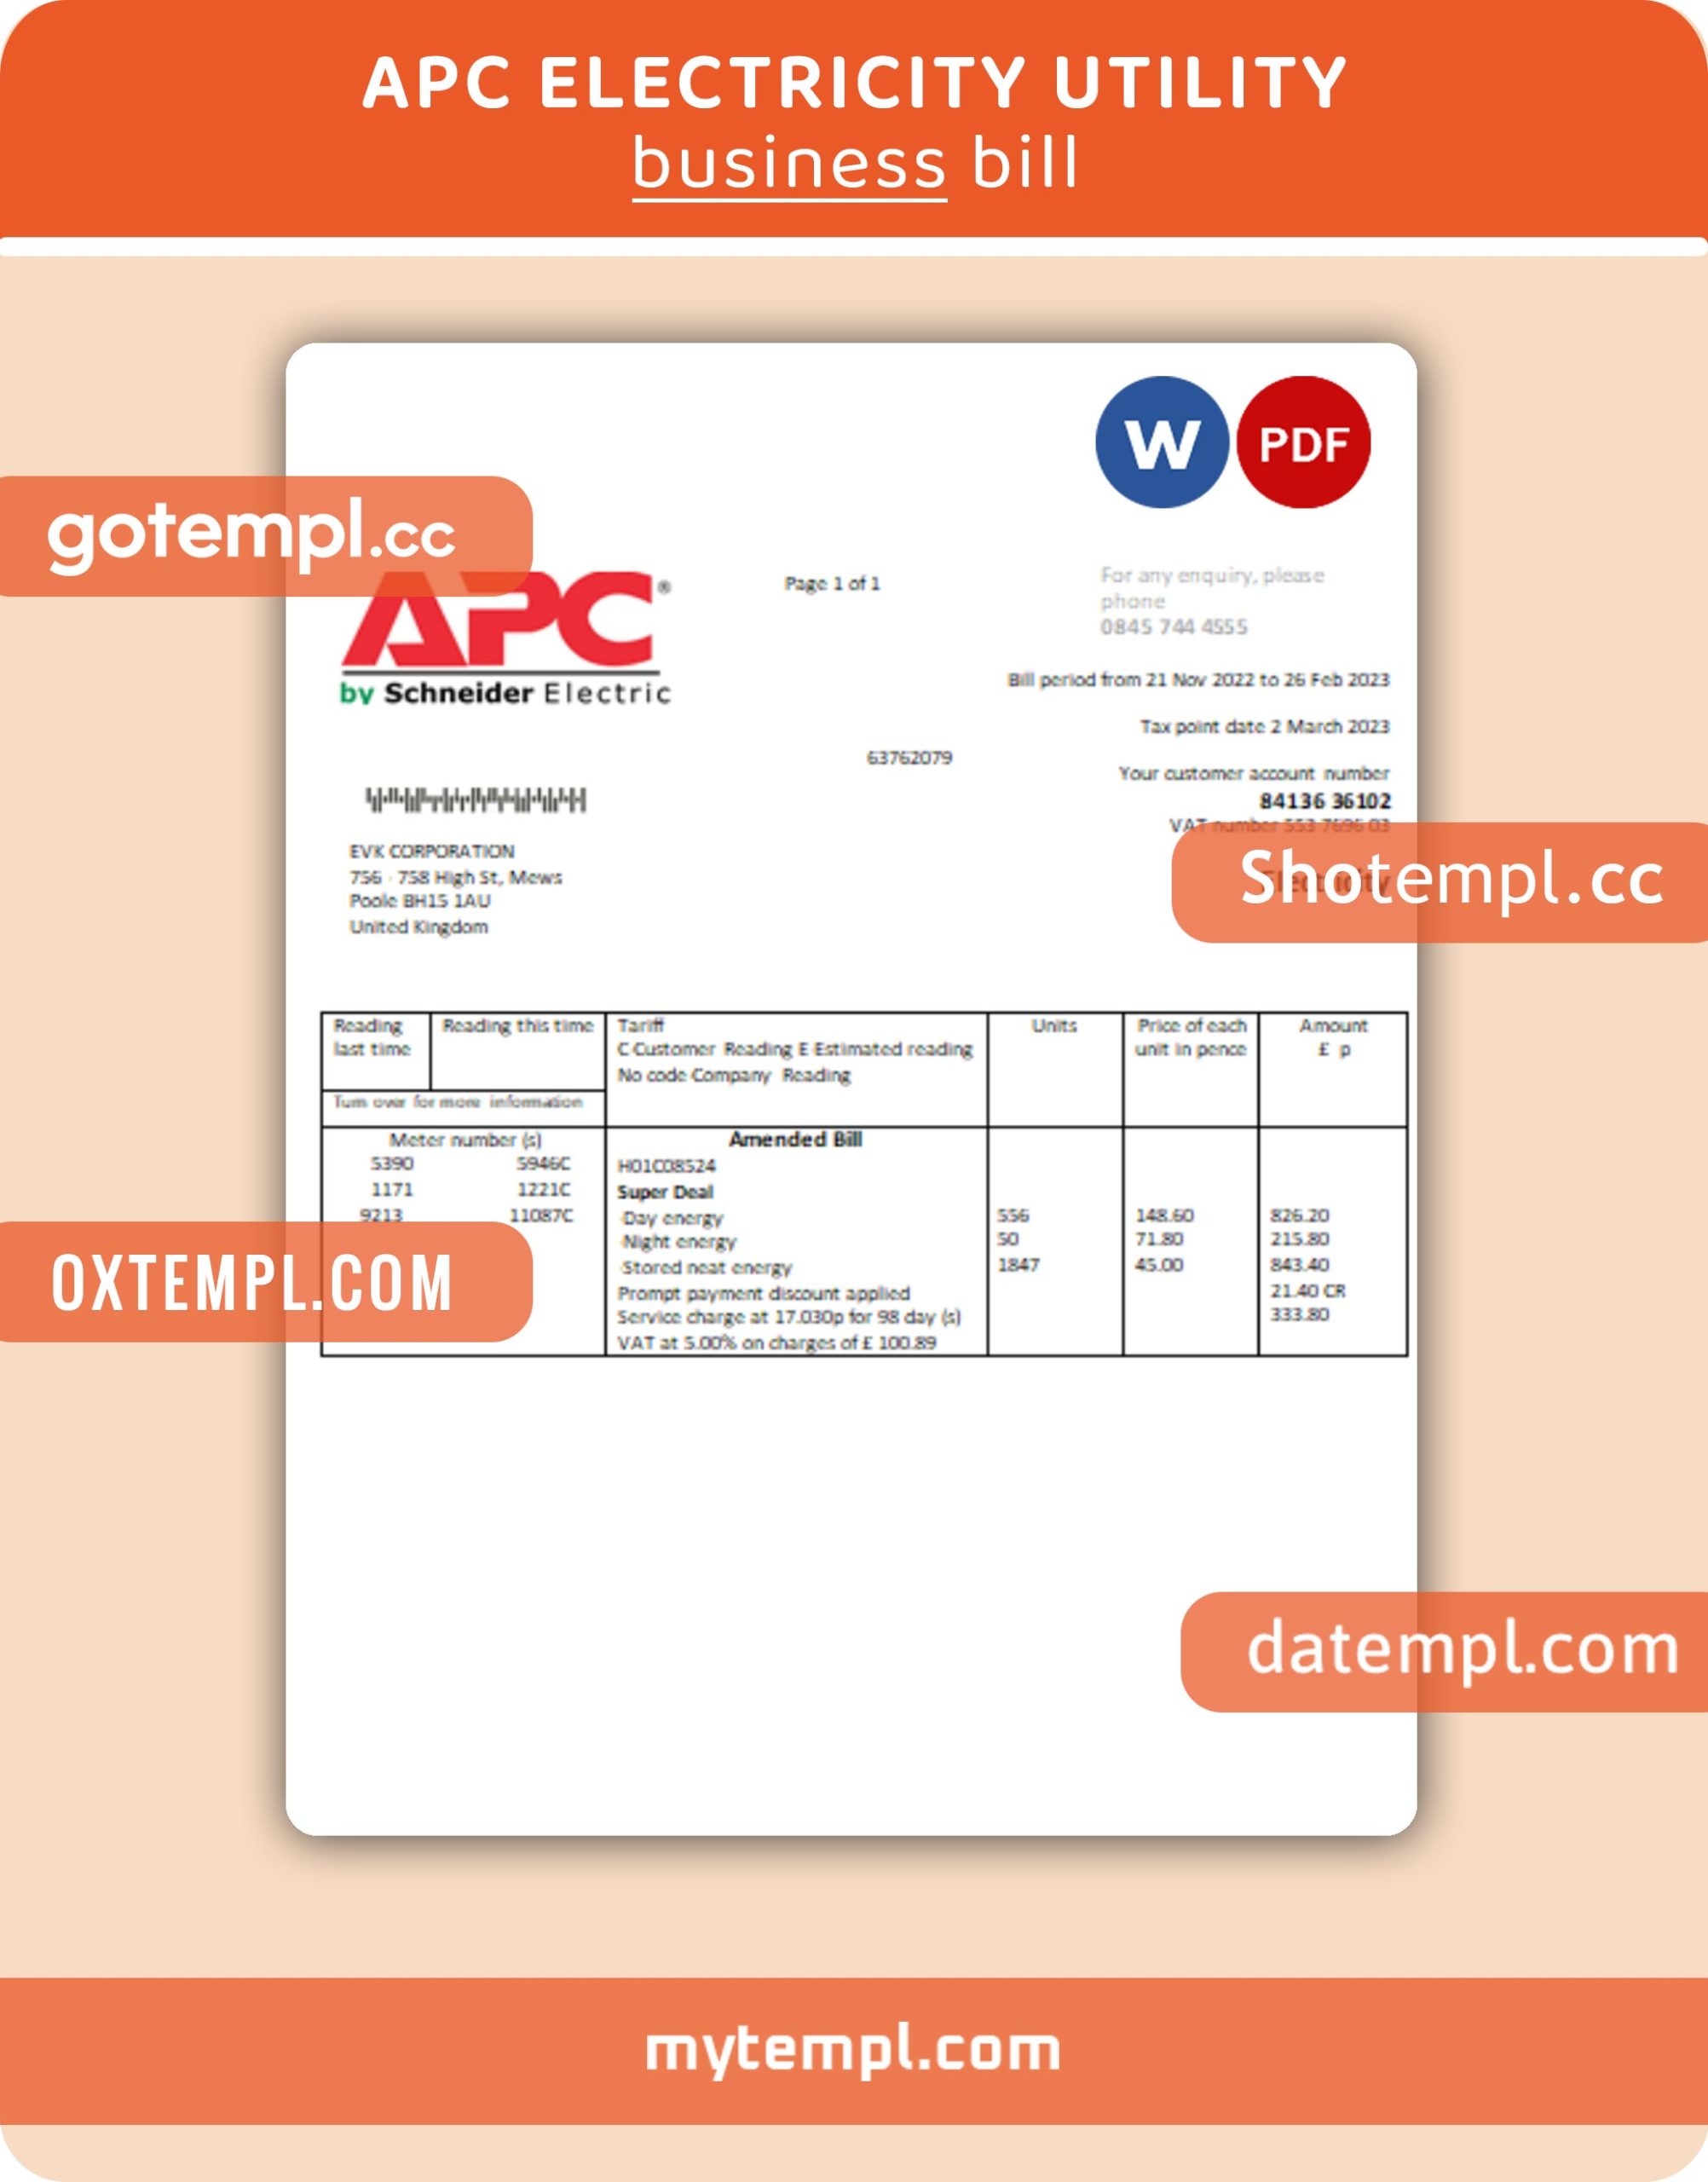 APC electricity business utility bill, Word and PDF template, 2 pages